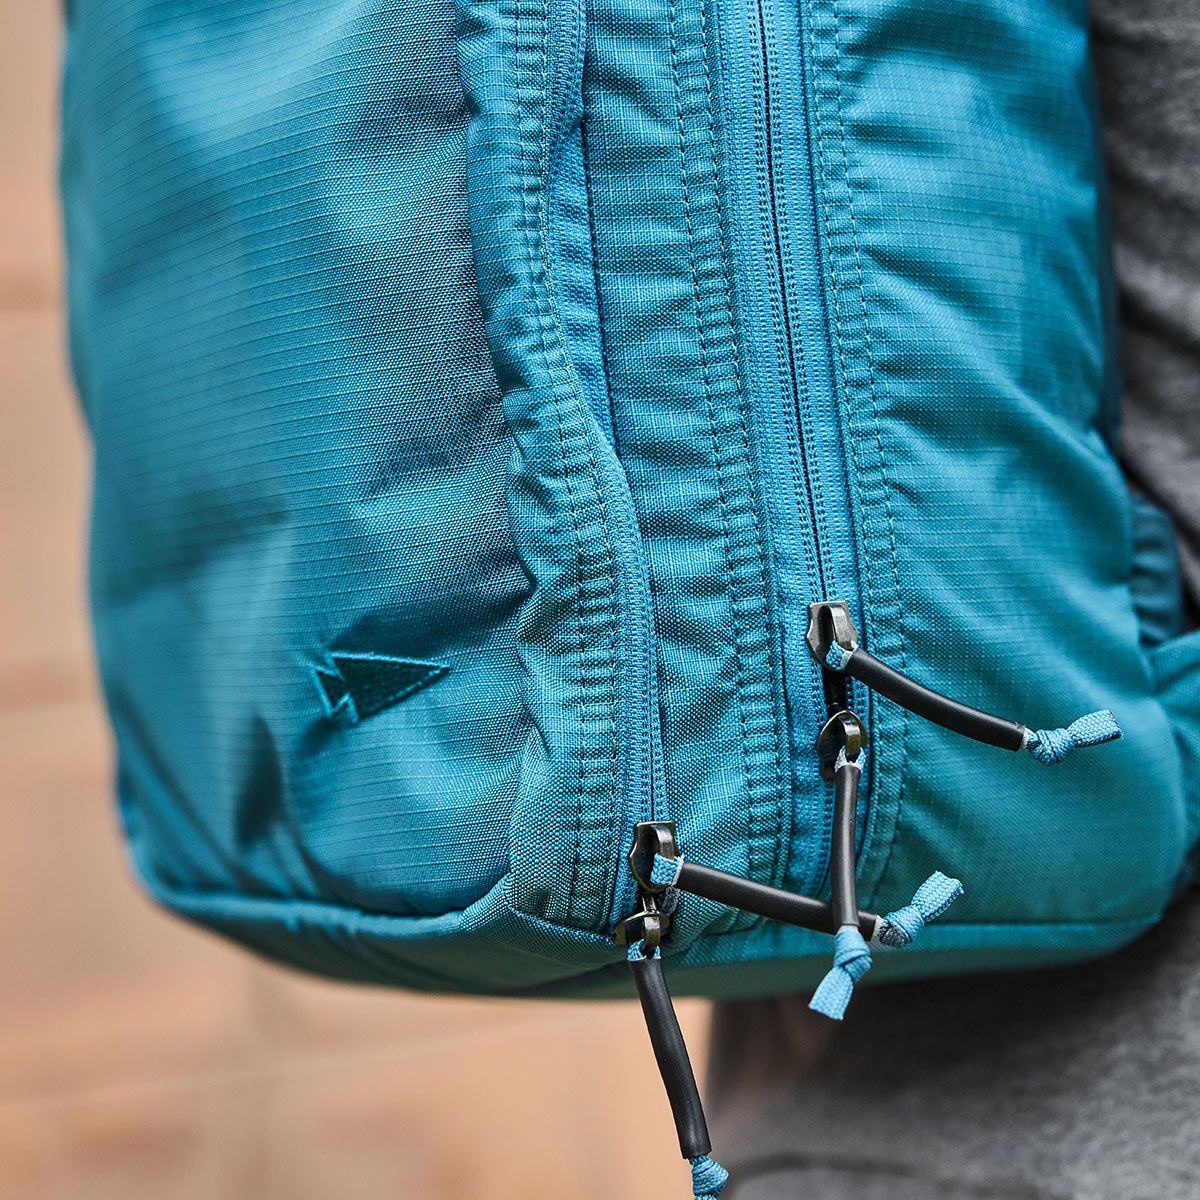 Bullet Ruck Double Compartment - Ripstop ROBIC® - Tidal Blue